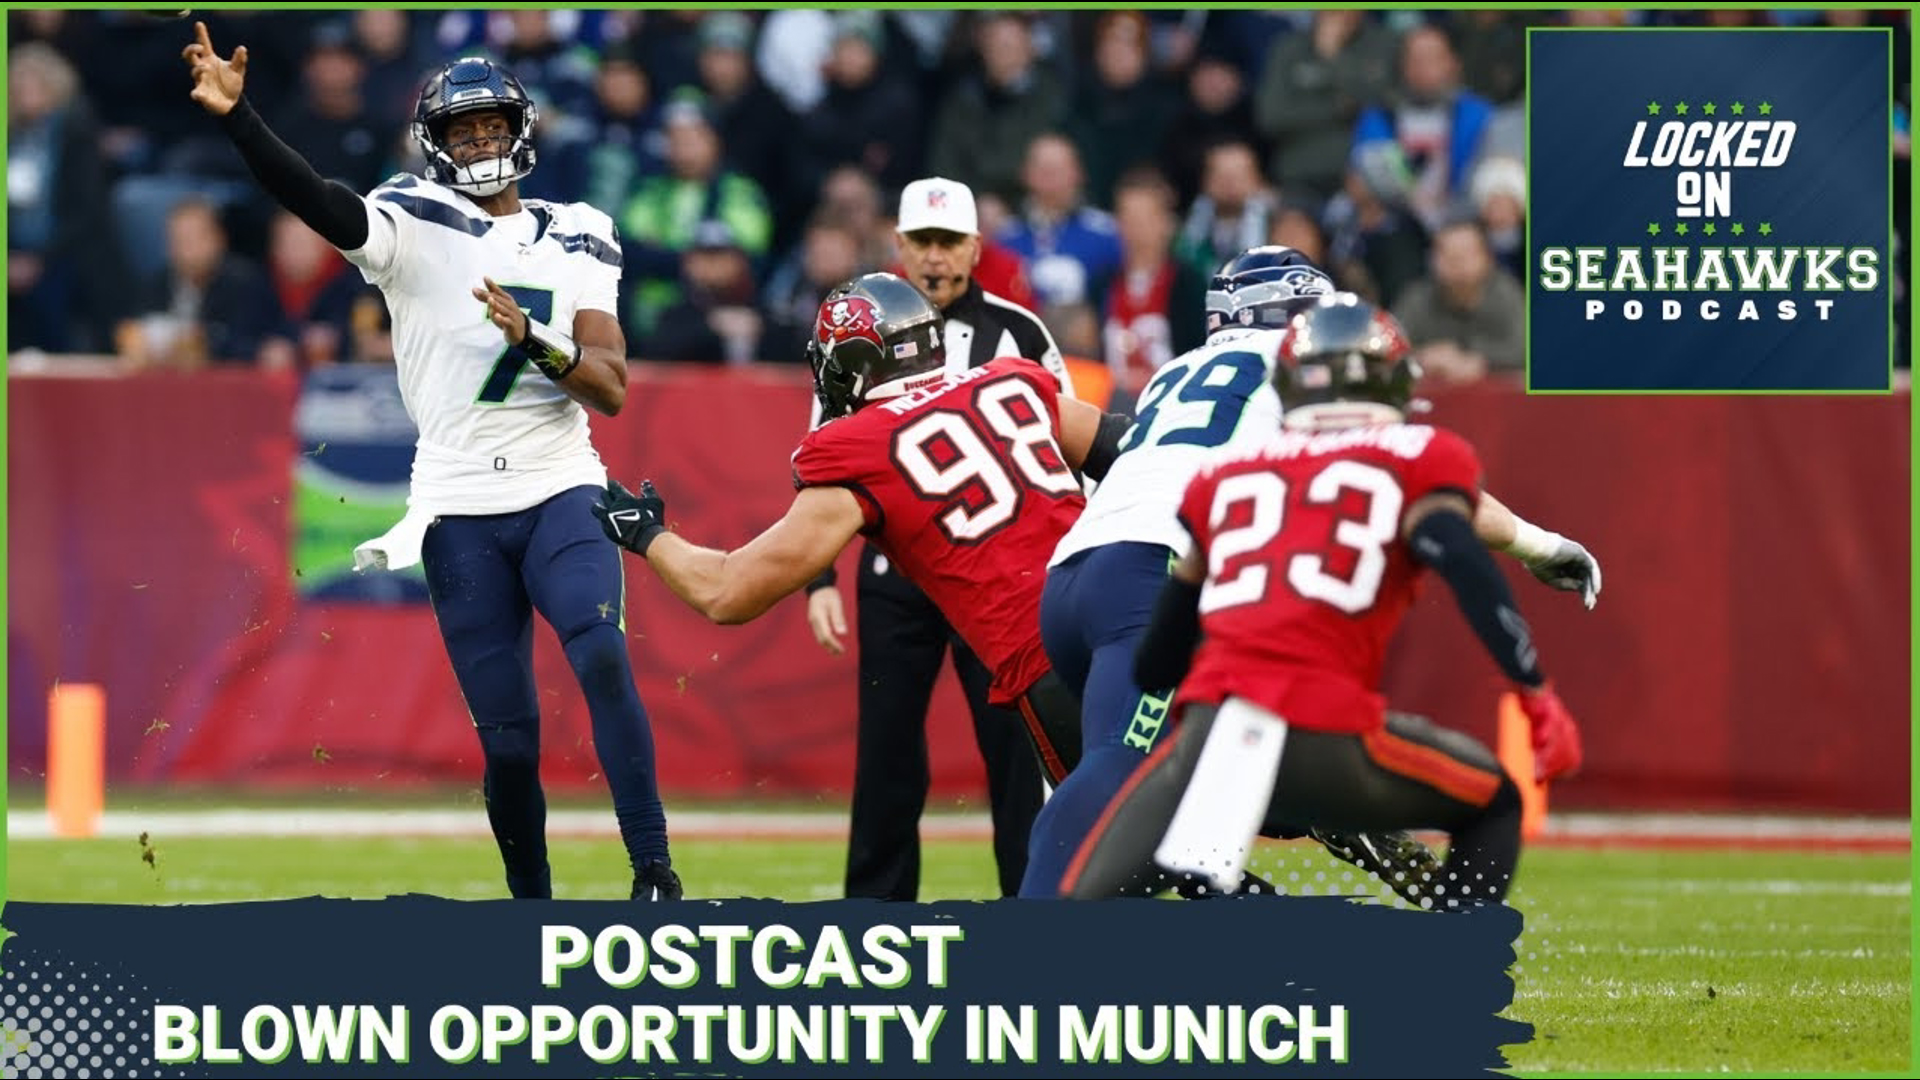 Host Corbin Smith breaks down a disappointing missed opportunity for Seattle headlined by poor third down play on both sides of the football.